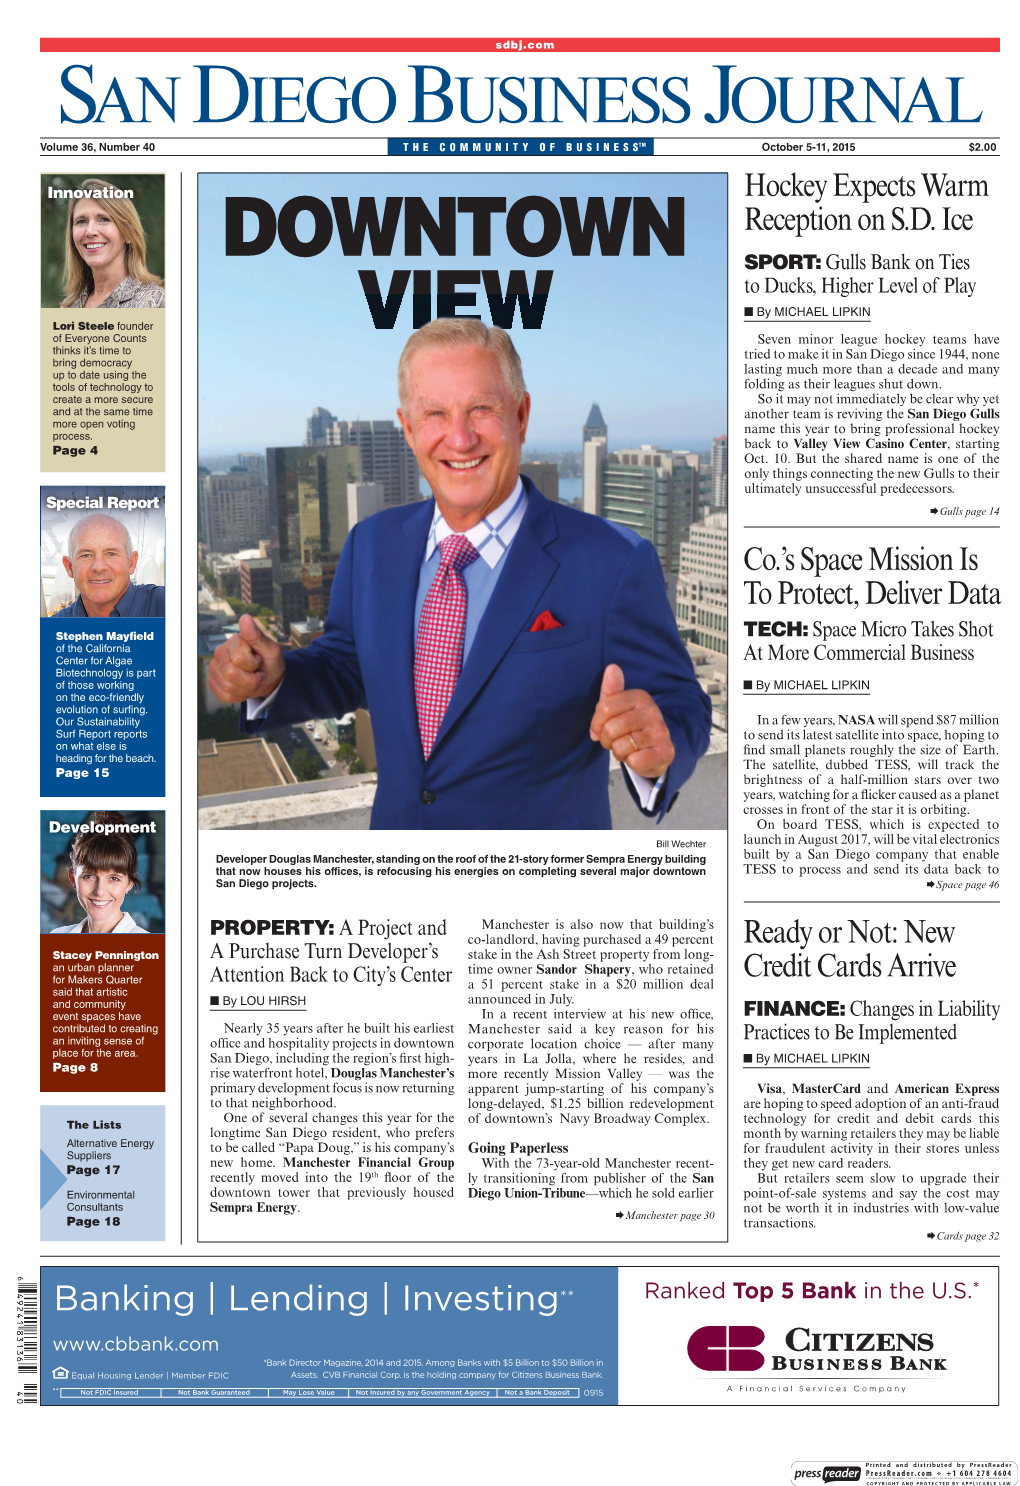 Downtown View 10/05/15 Press Release San Diego Business